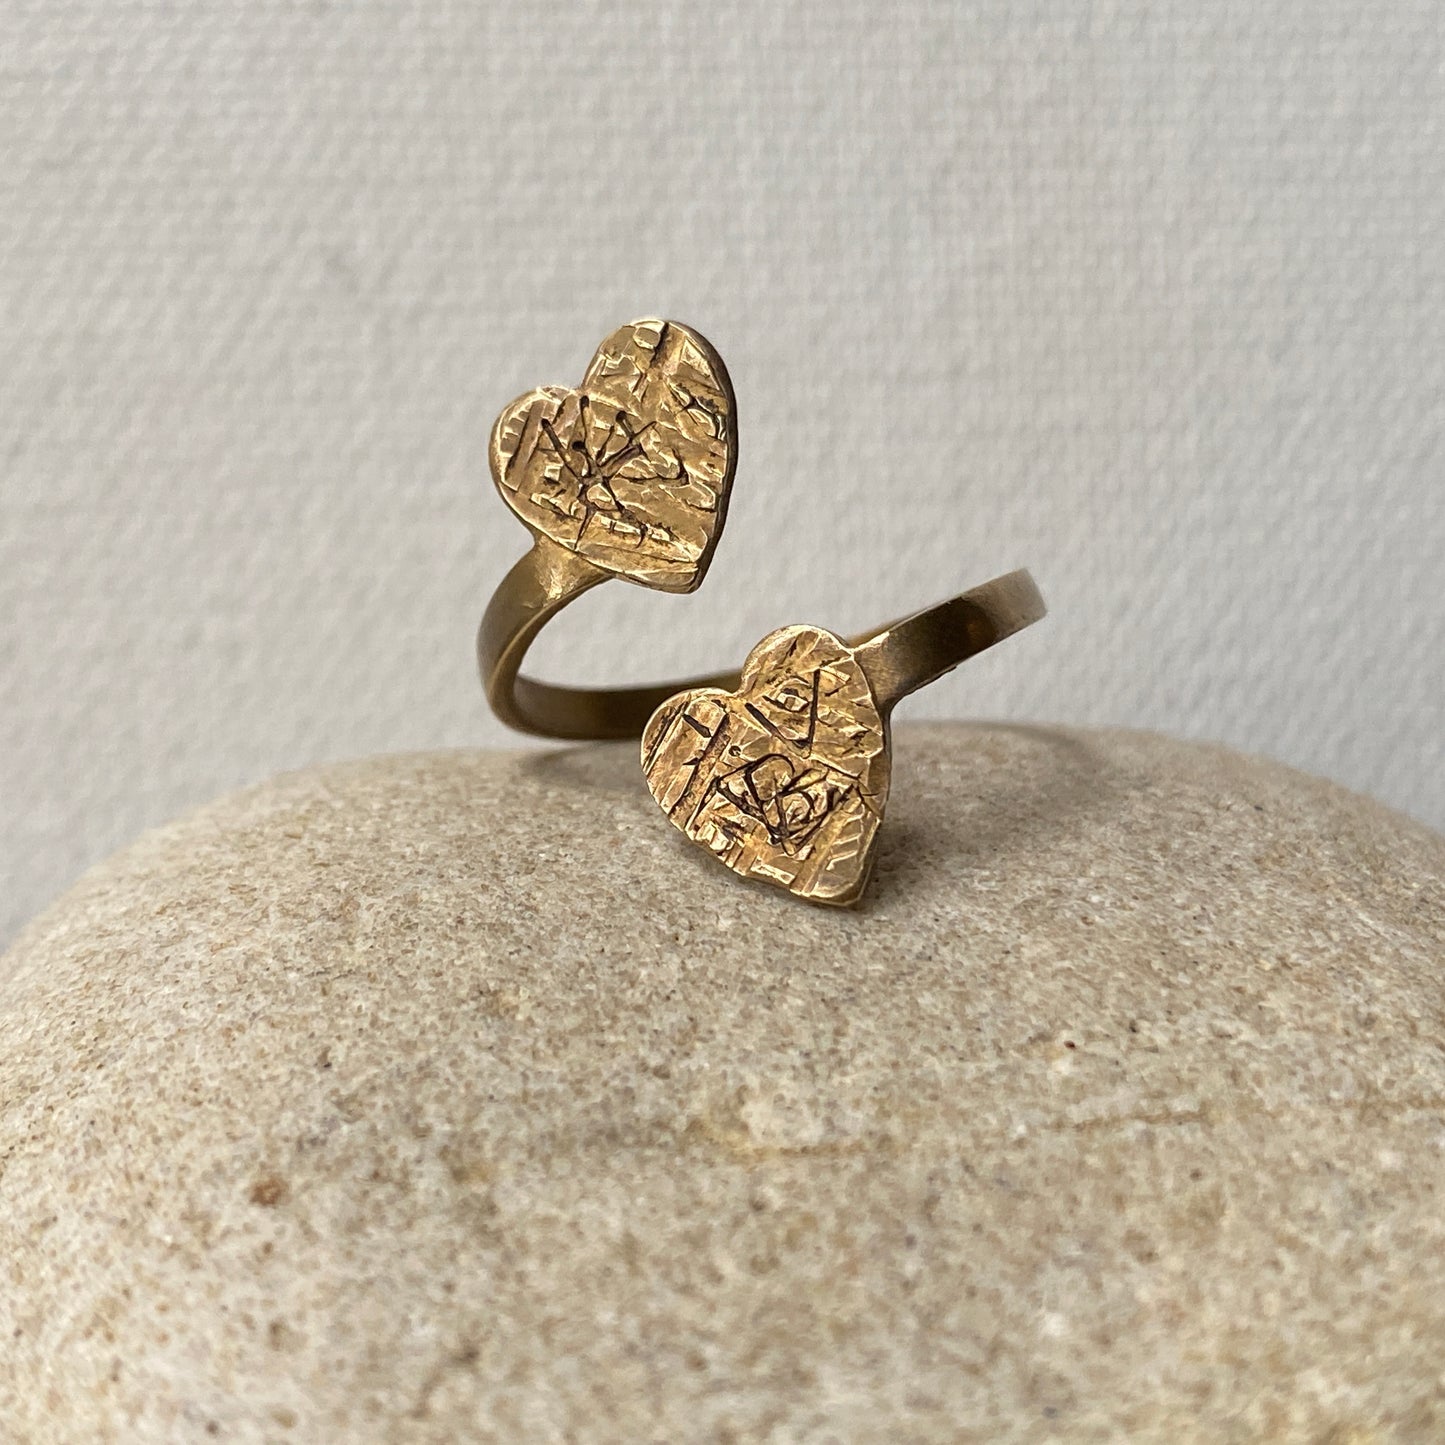 Adjustable Heart Ring with Textured Finish